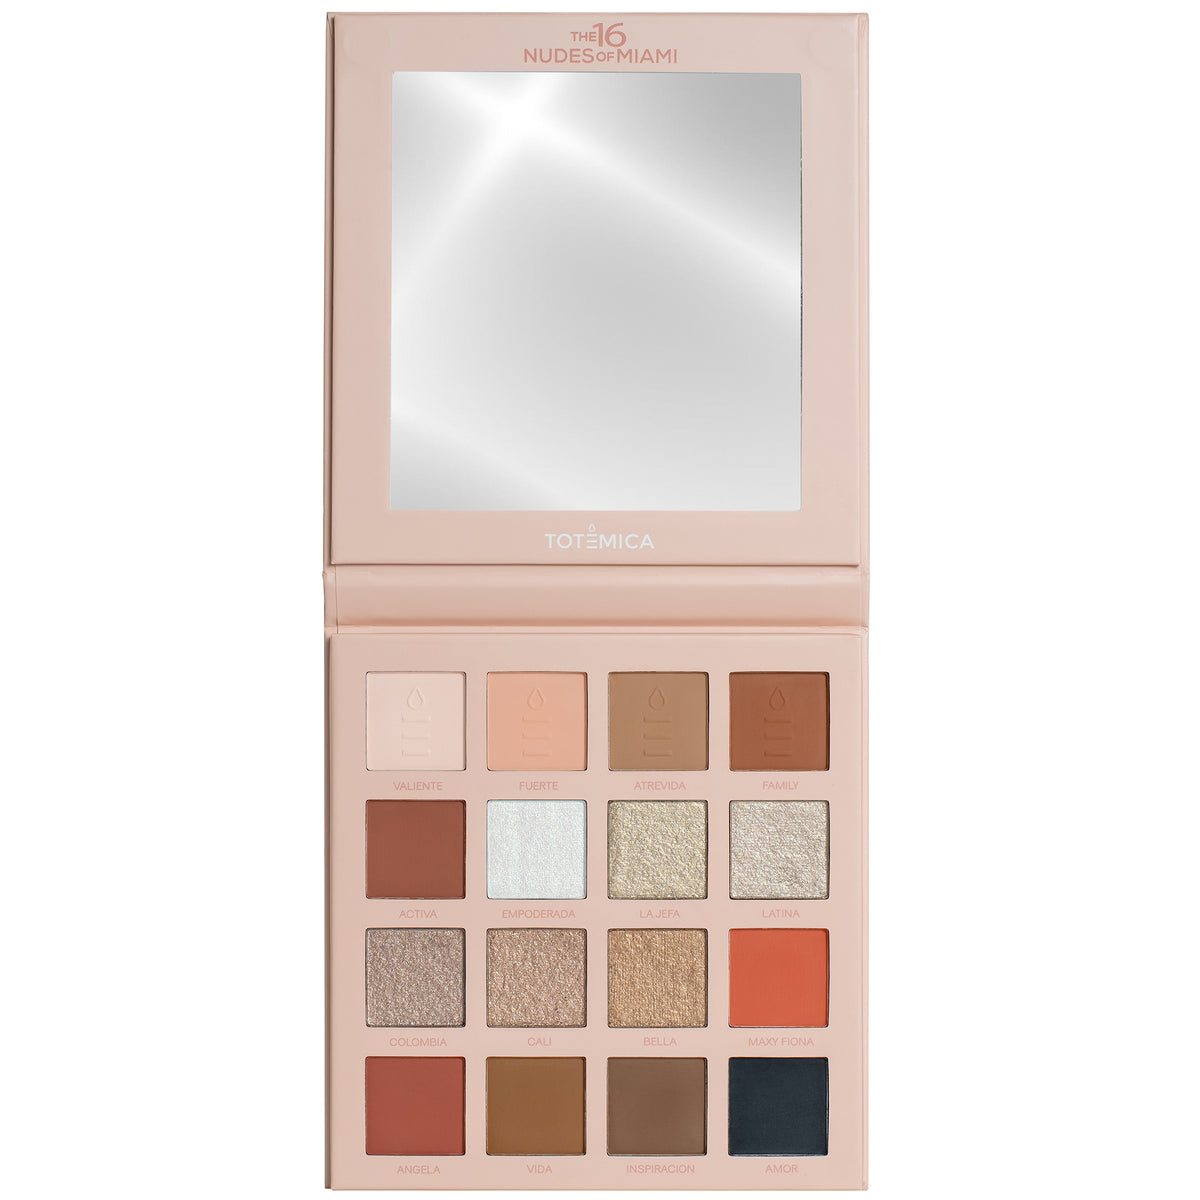 16 Nudes Of Wholesale Miami - Totemica The | Makeup Palette